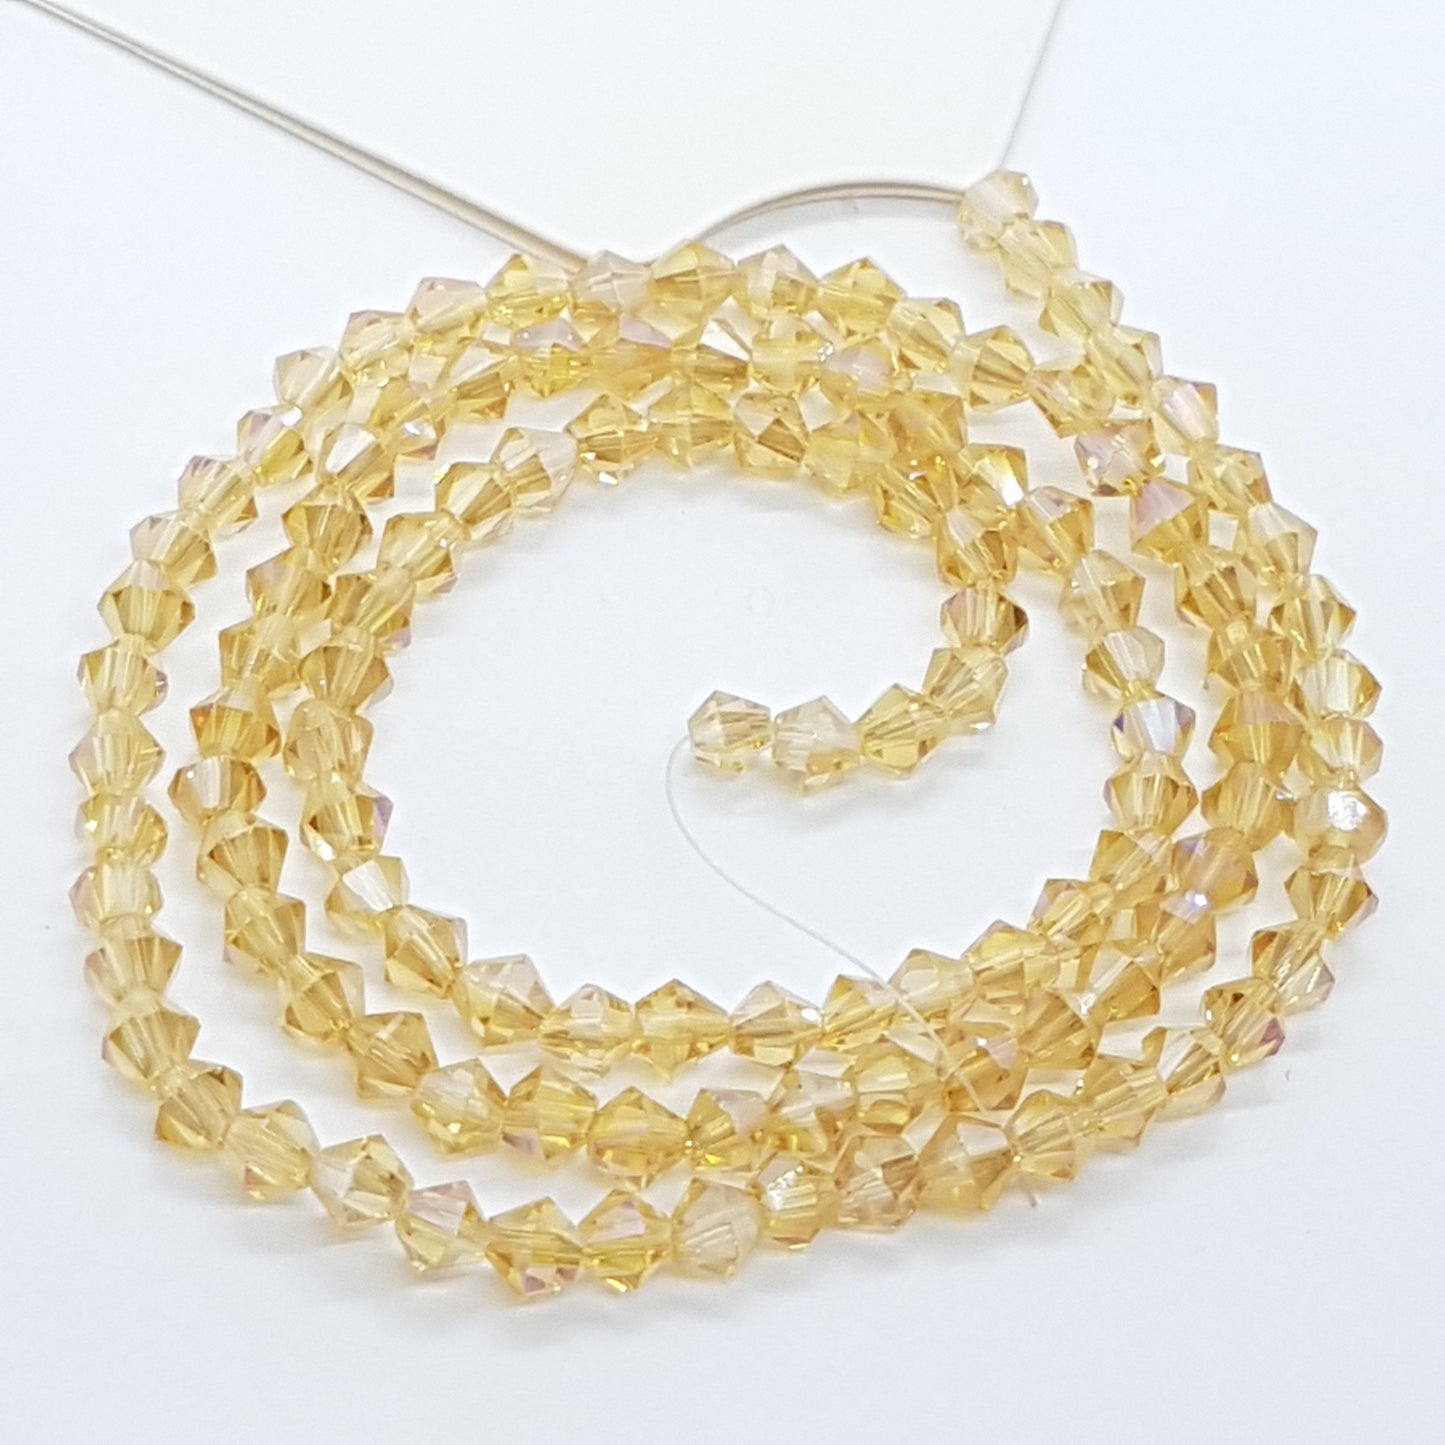 4mm Light Gold Crystal Glass AB Bicones